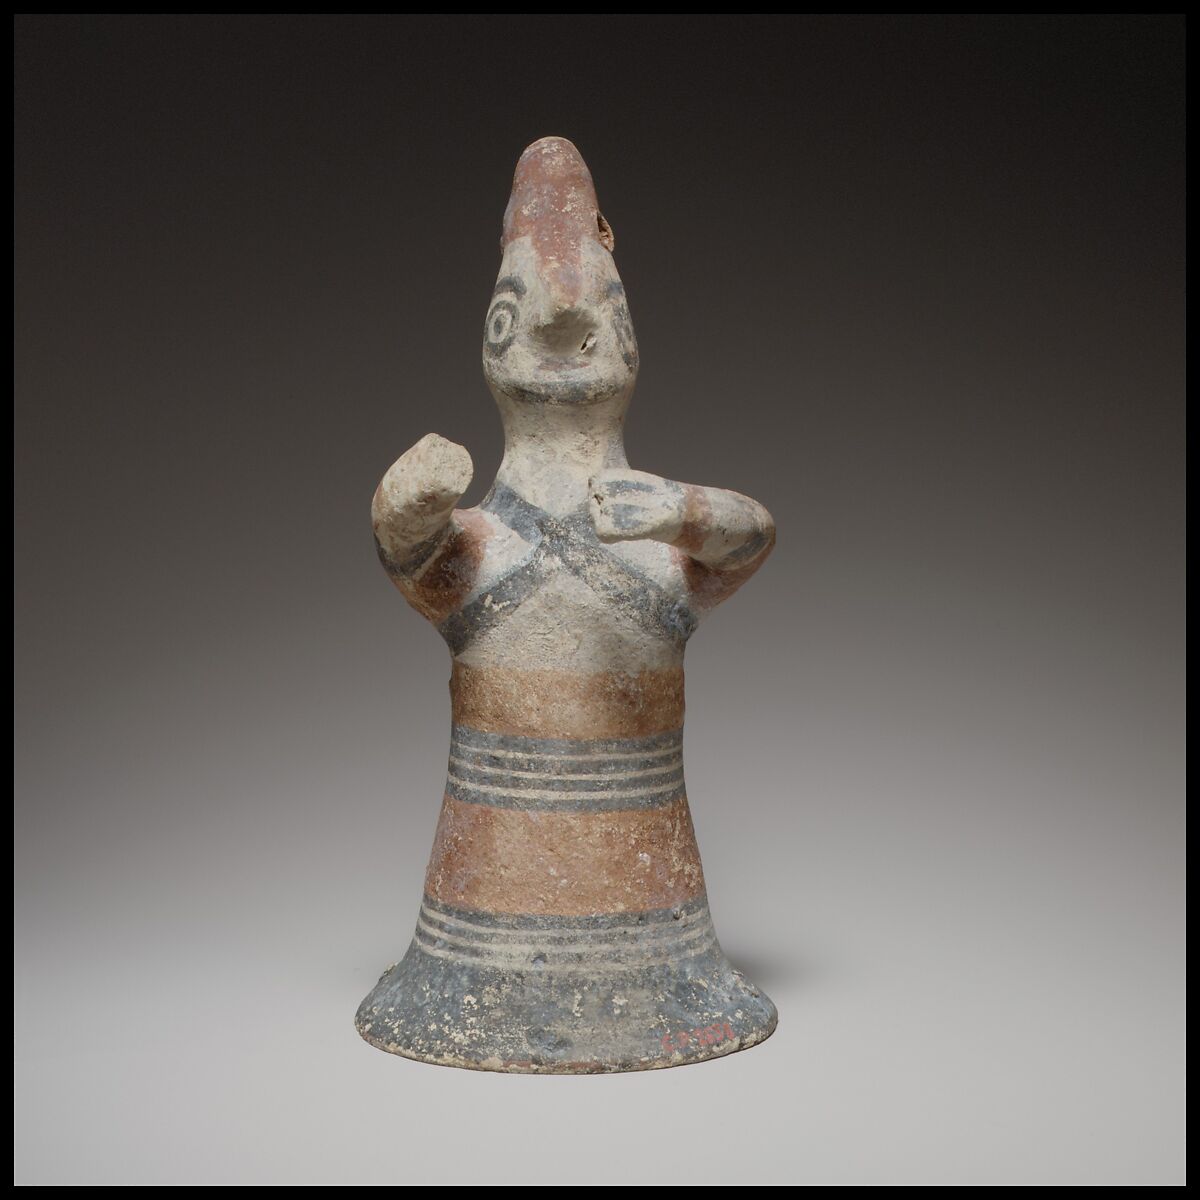 Terracotta statuette of a man, probably a warrior